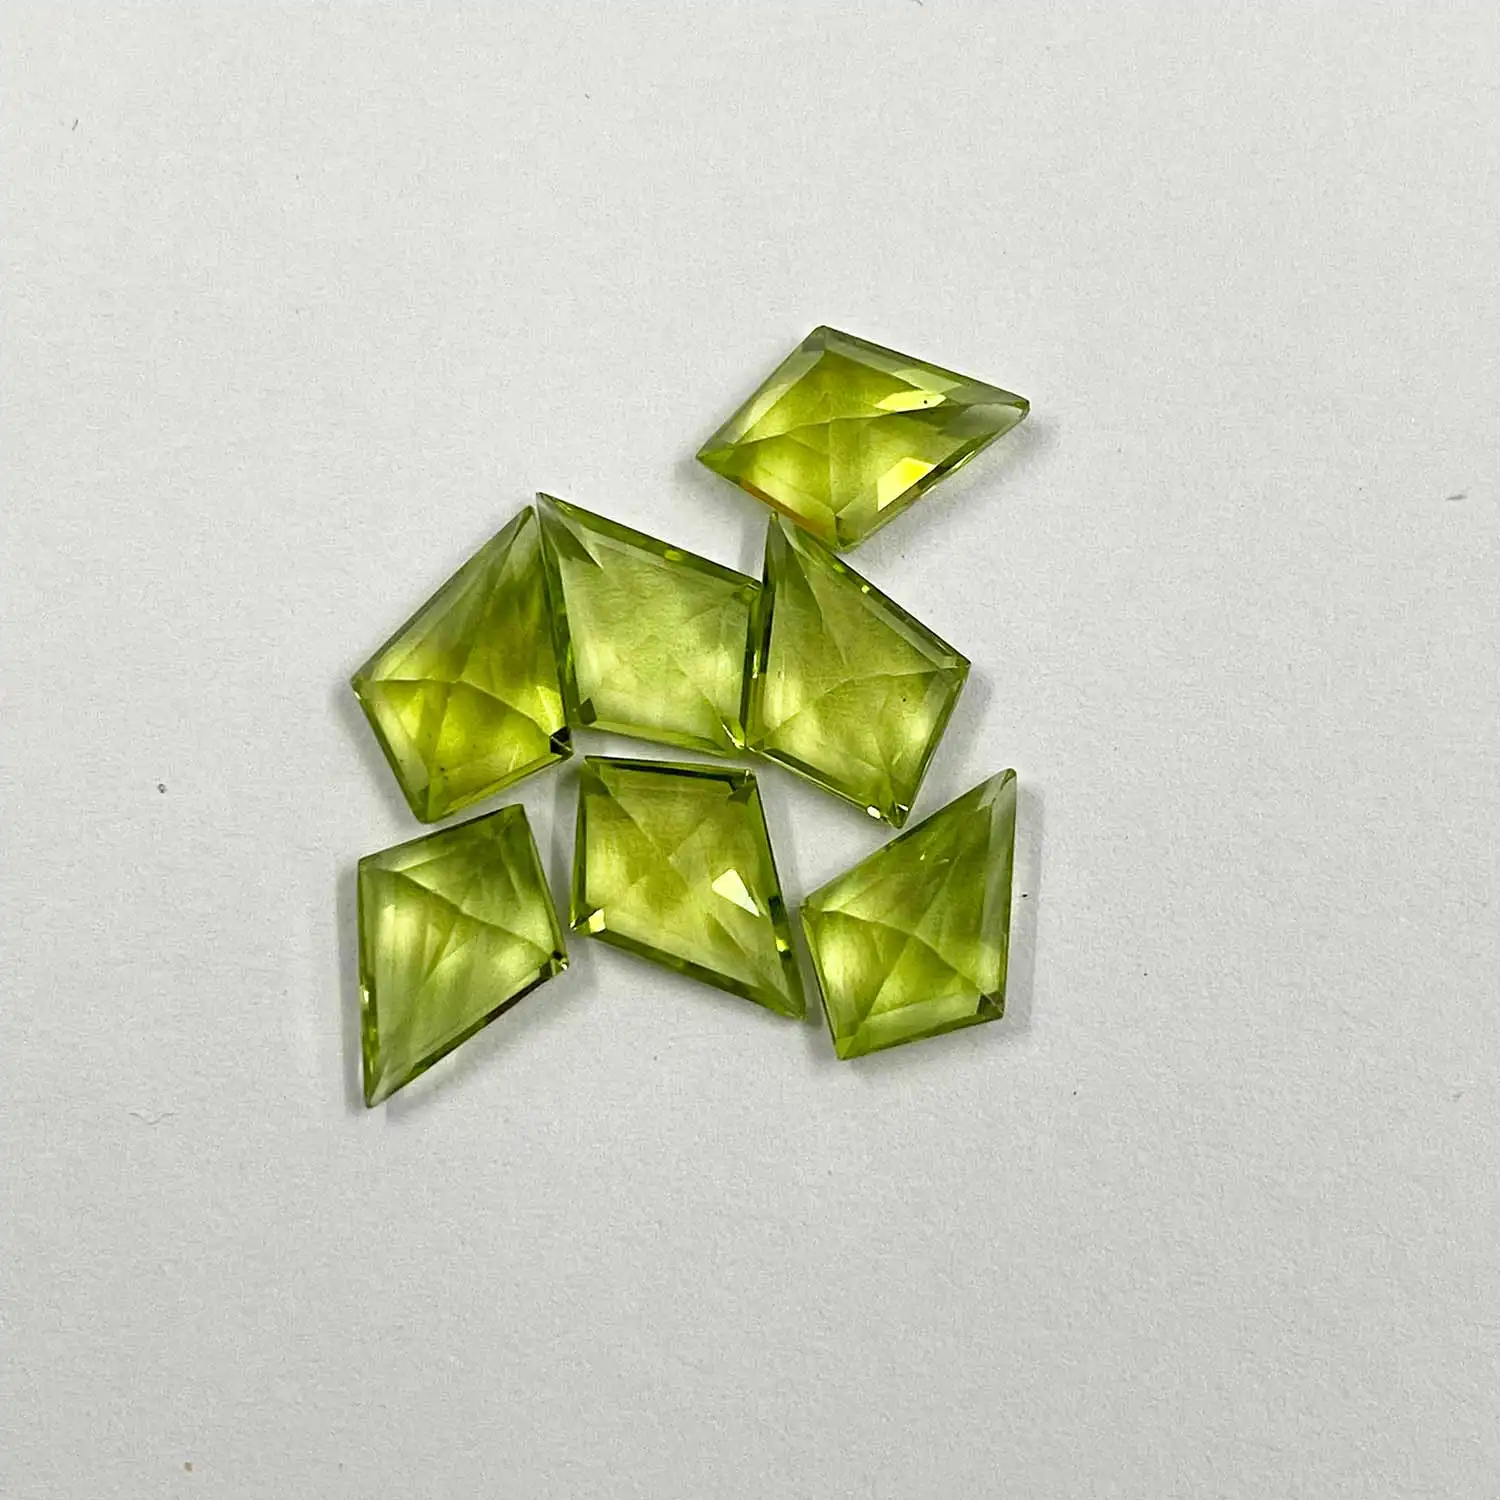 5x8mm Faceted Kite Shape Real Natural Peridot Loose Certified Gemstone Outstanding Quality Handmade Gemstones Jewelry For Sale